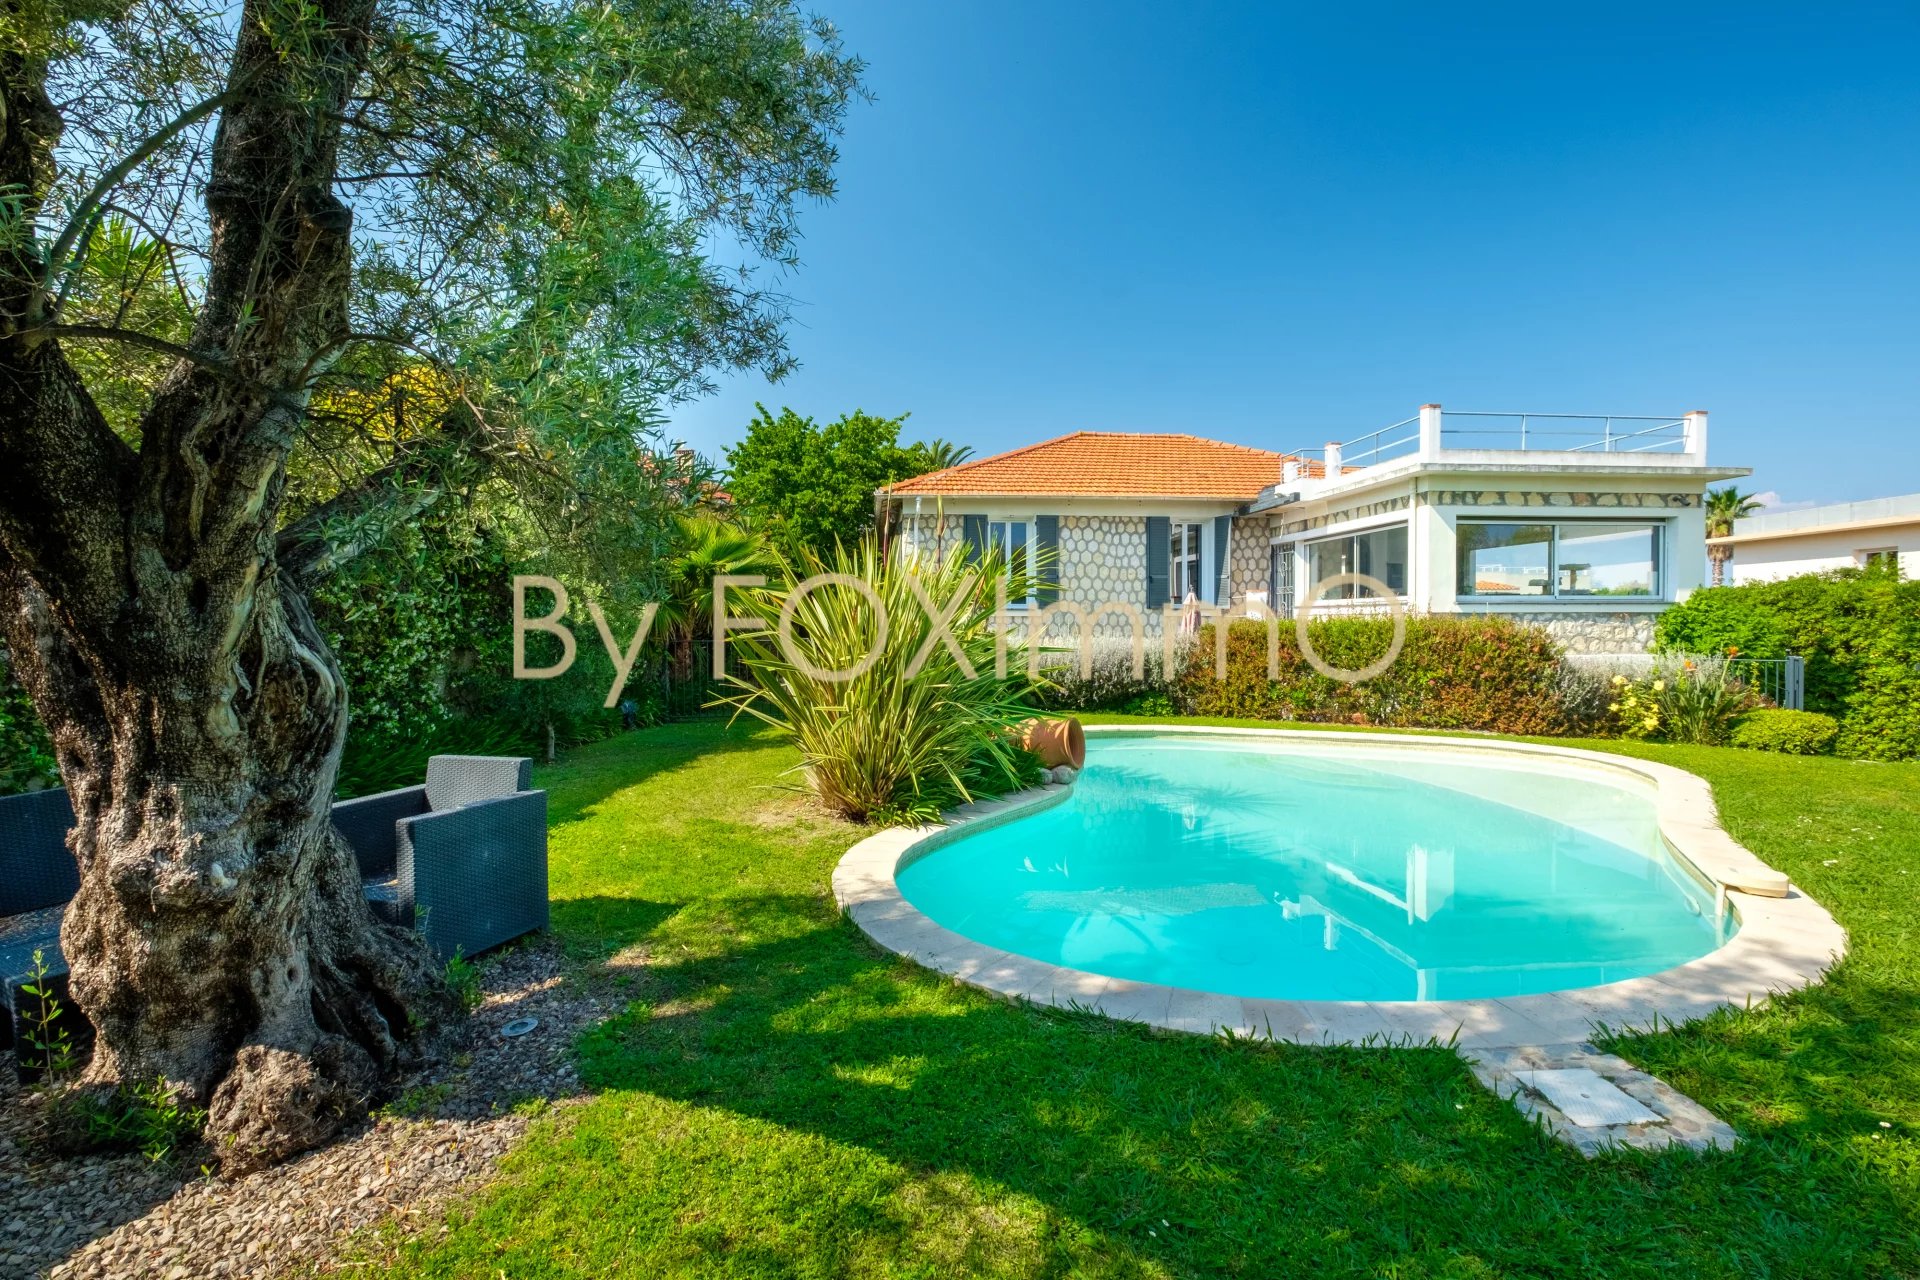 in Antibes, there is a beautiful villa of over 200m², located in a completely peaceful environment, with a swimming pool and views of the sea and mountains